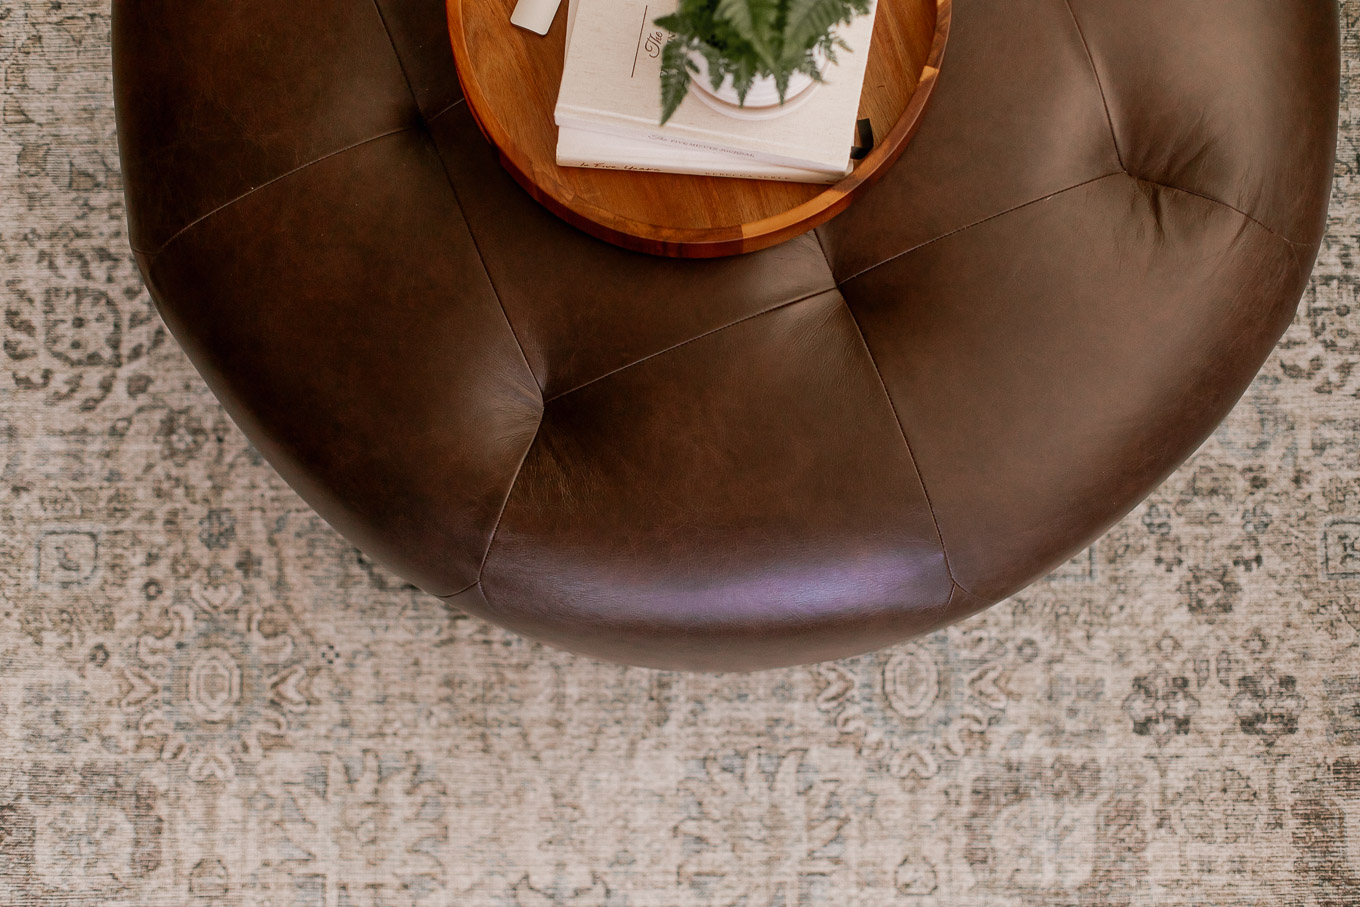 Searching for the Perfect Coffee Table - Article Timpani Ottoman Review | Round Leather Ottoman | Louella Reese, North Carolina Lifestyle and Fashion Blog